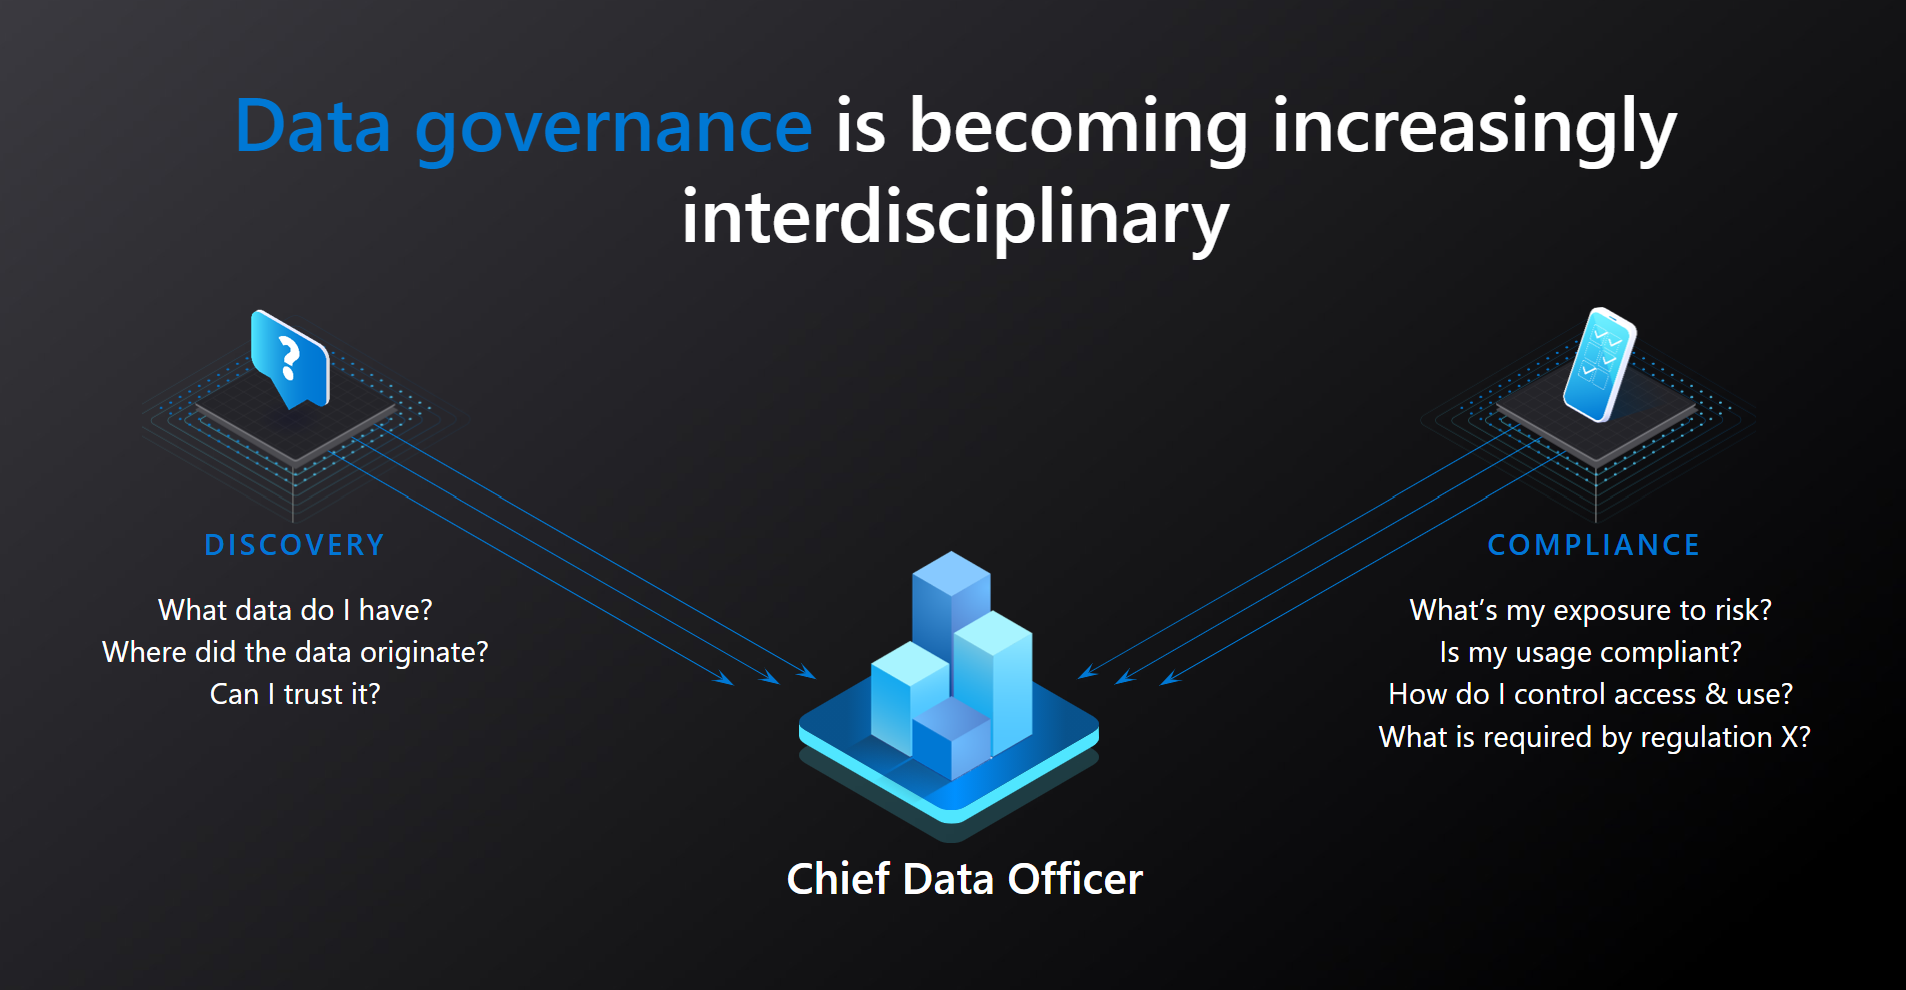 Diagram of data governance that shows a Chief Data Officer connected to one icon that represents discovery considerations and another icon that represents compliance issues.